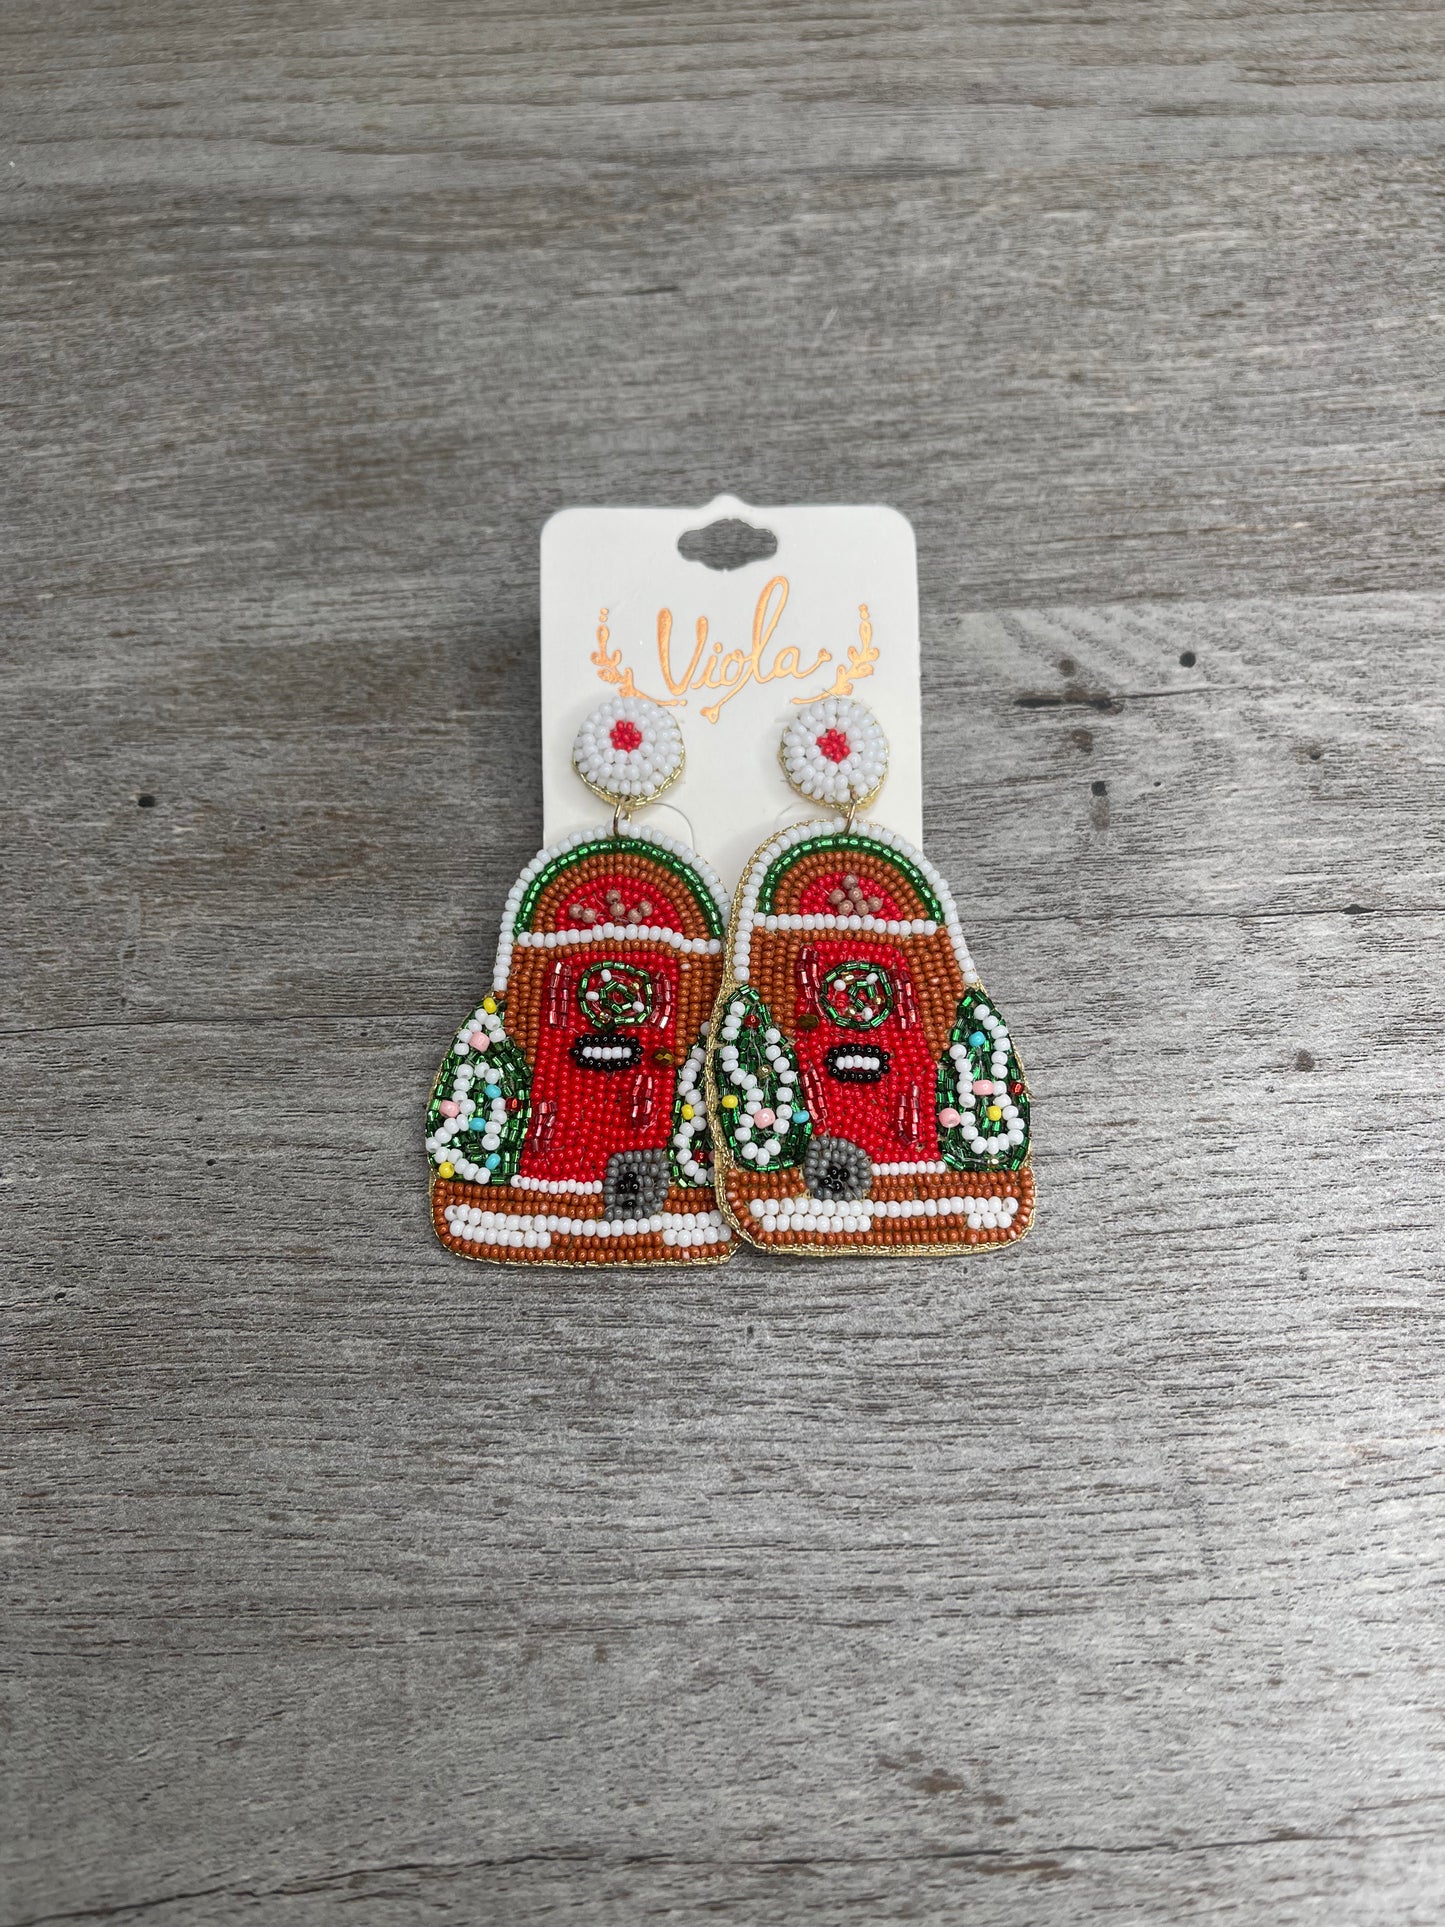 May Your Days Be Merry And Bright Earrings